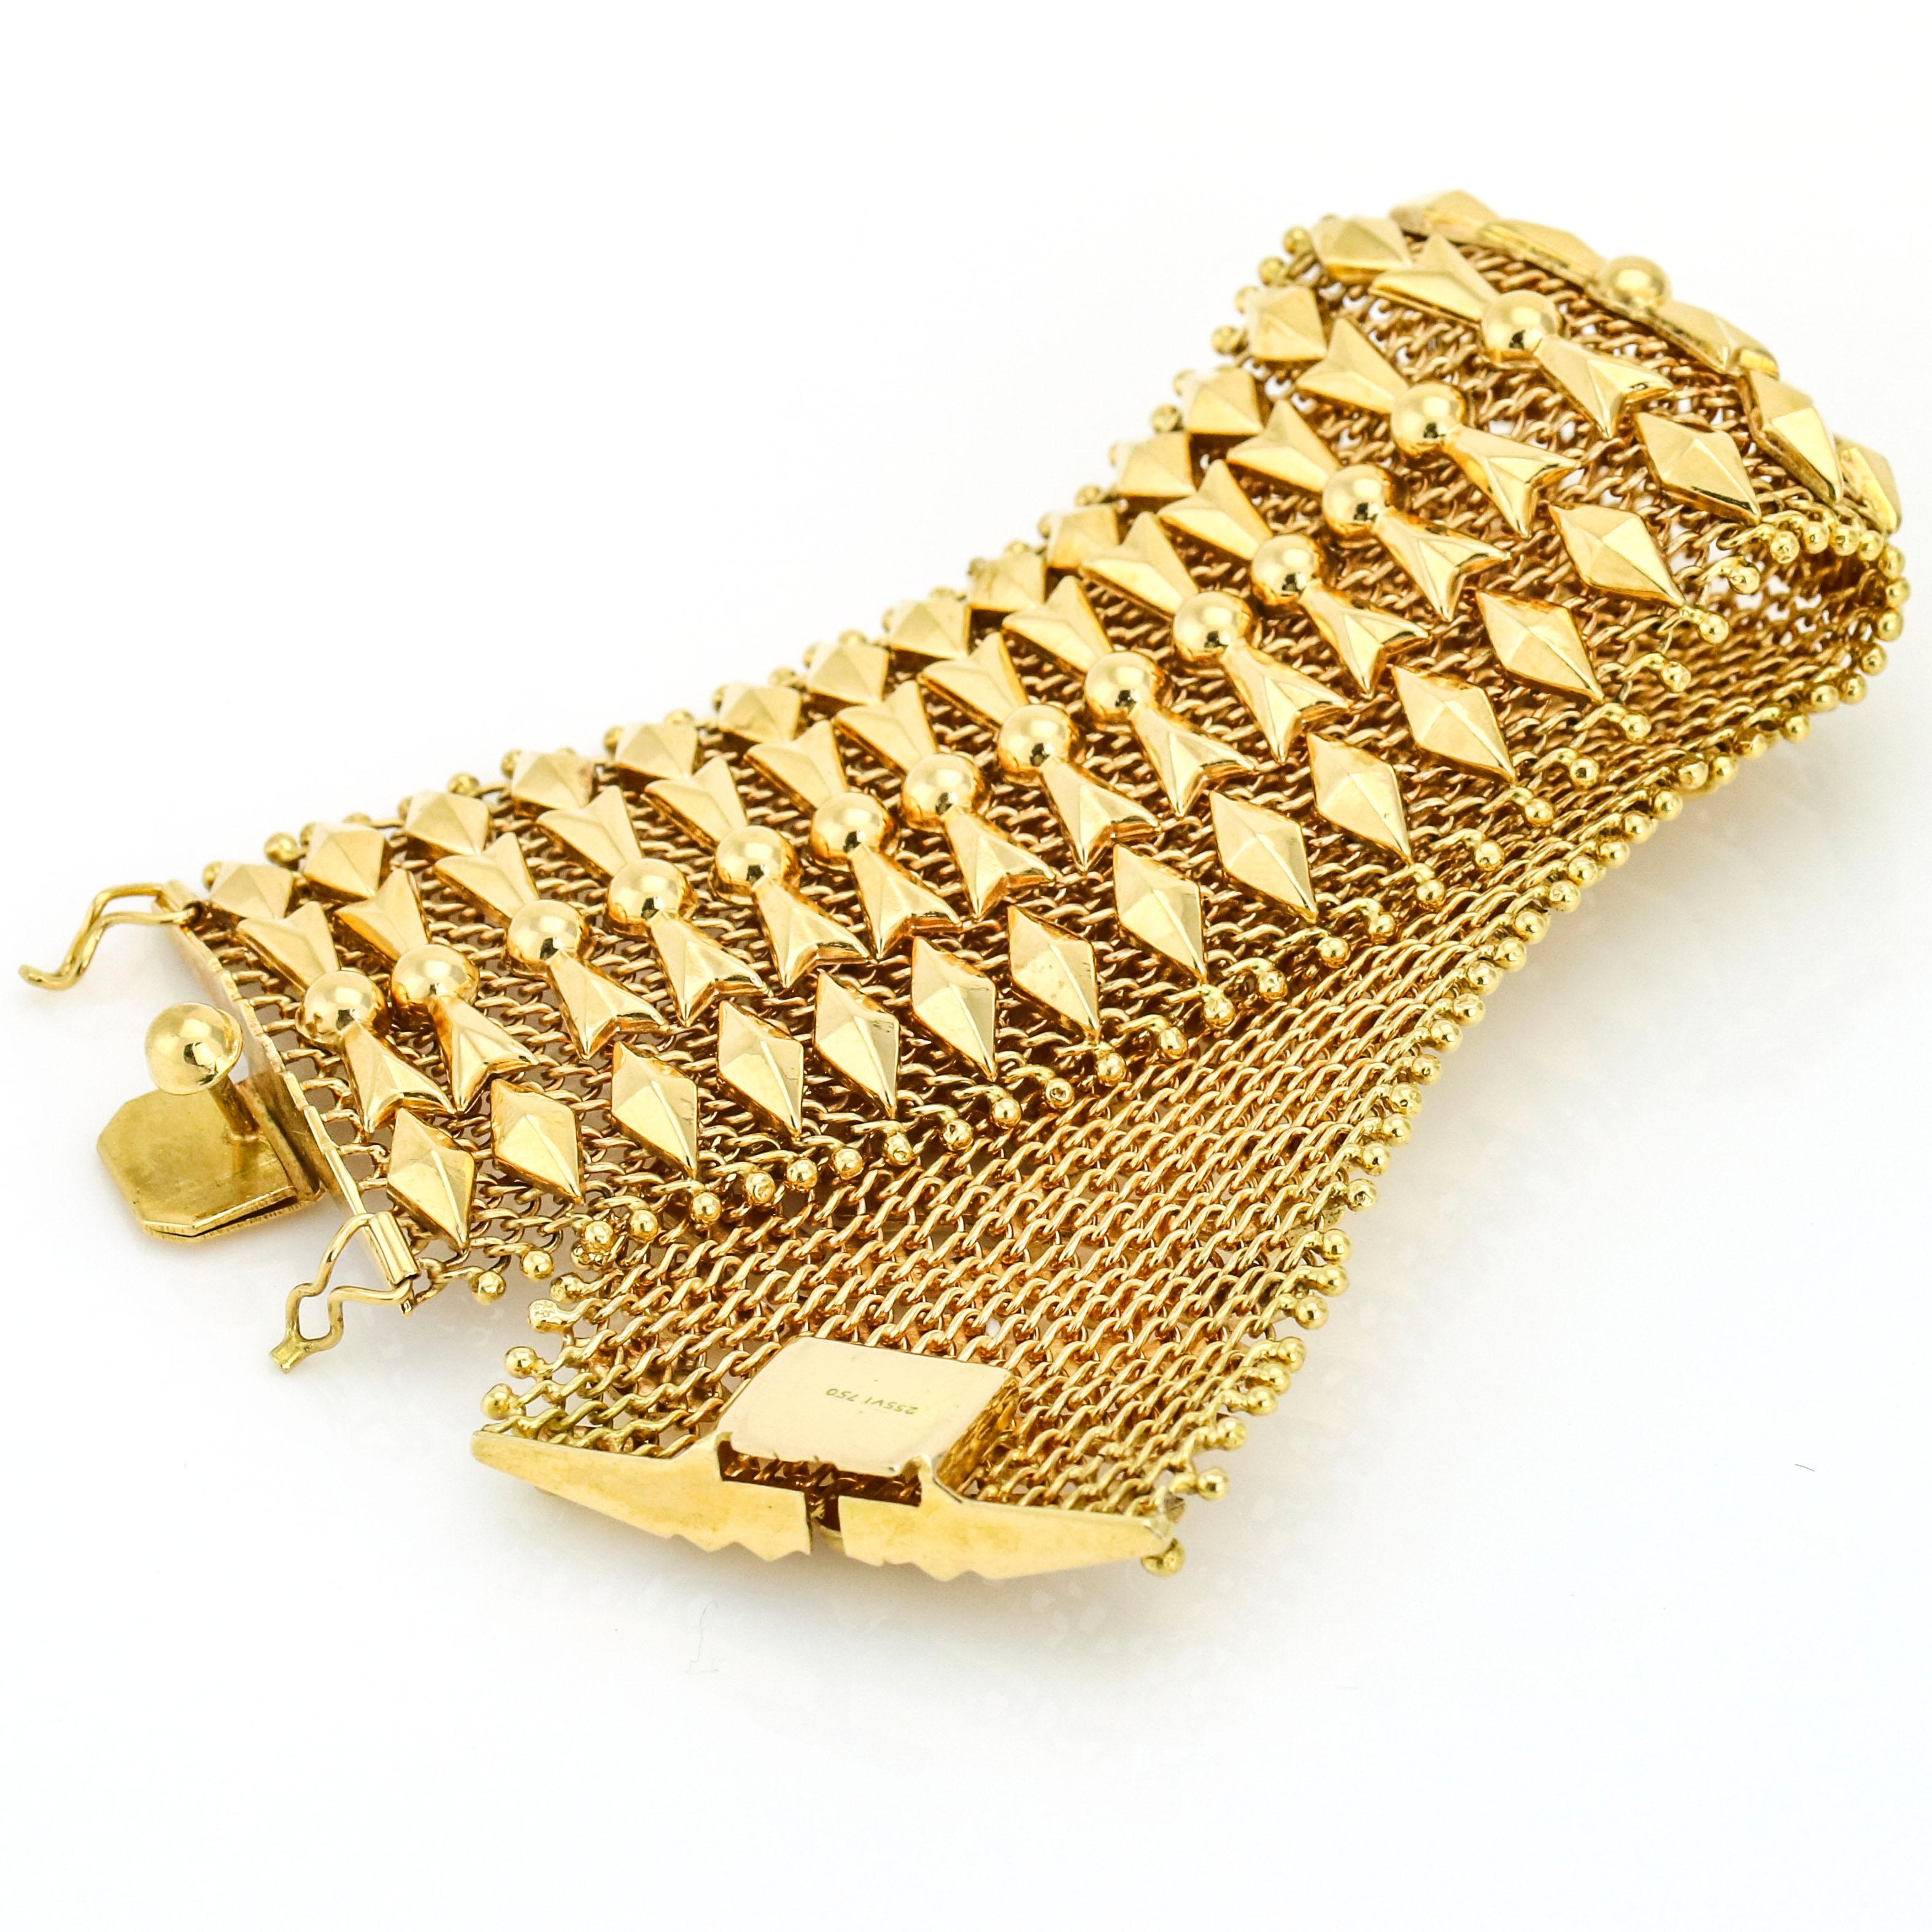 18 Karat Yellow Gold Italian Mesh Link Bracelet In Excellent Condition For Sale In Fort Lauderdale, FL